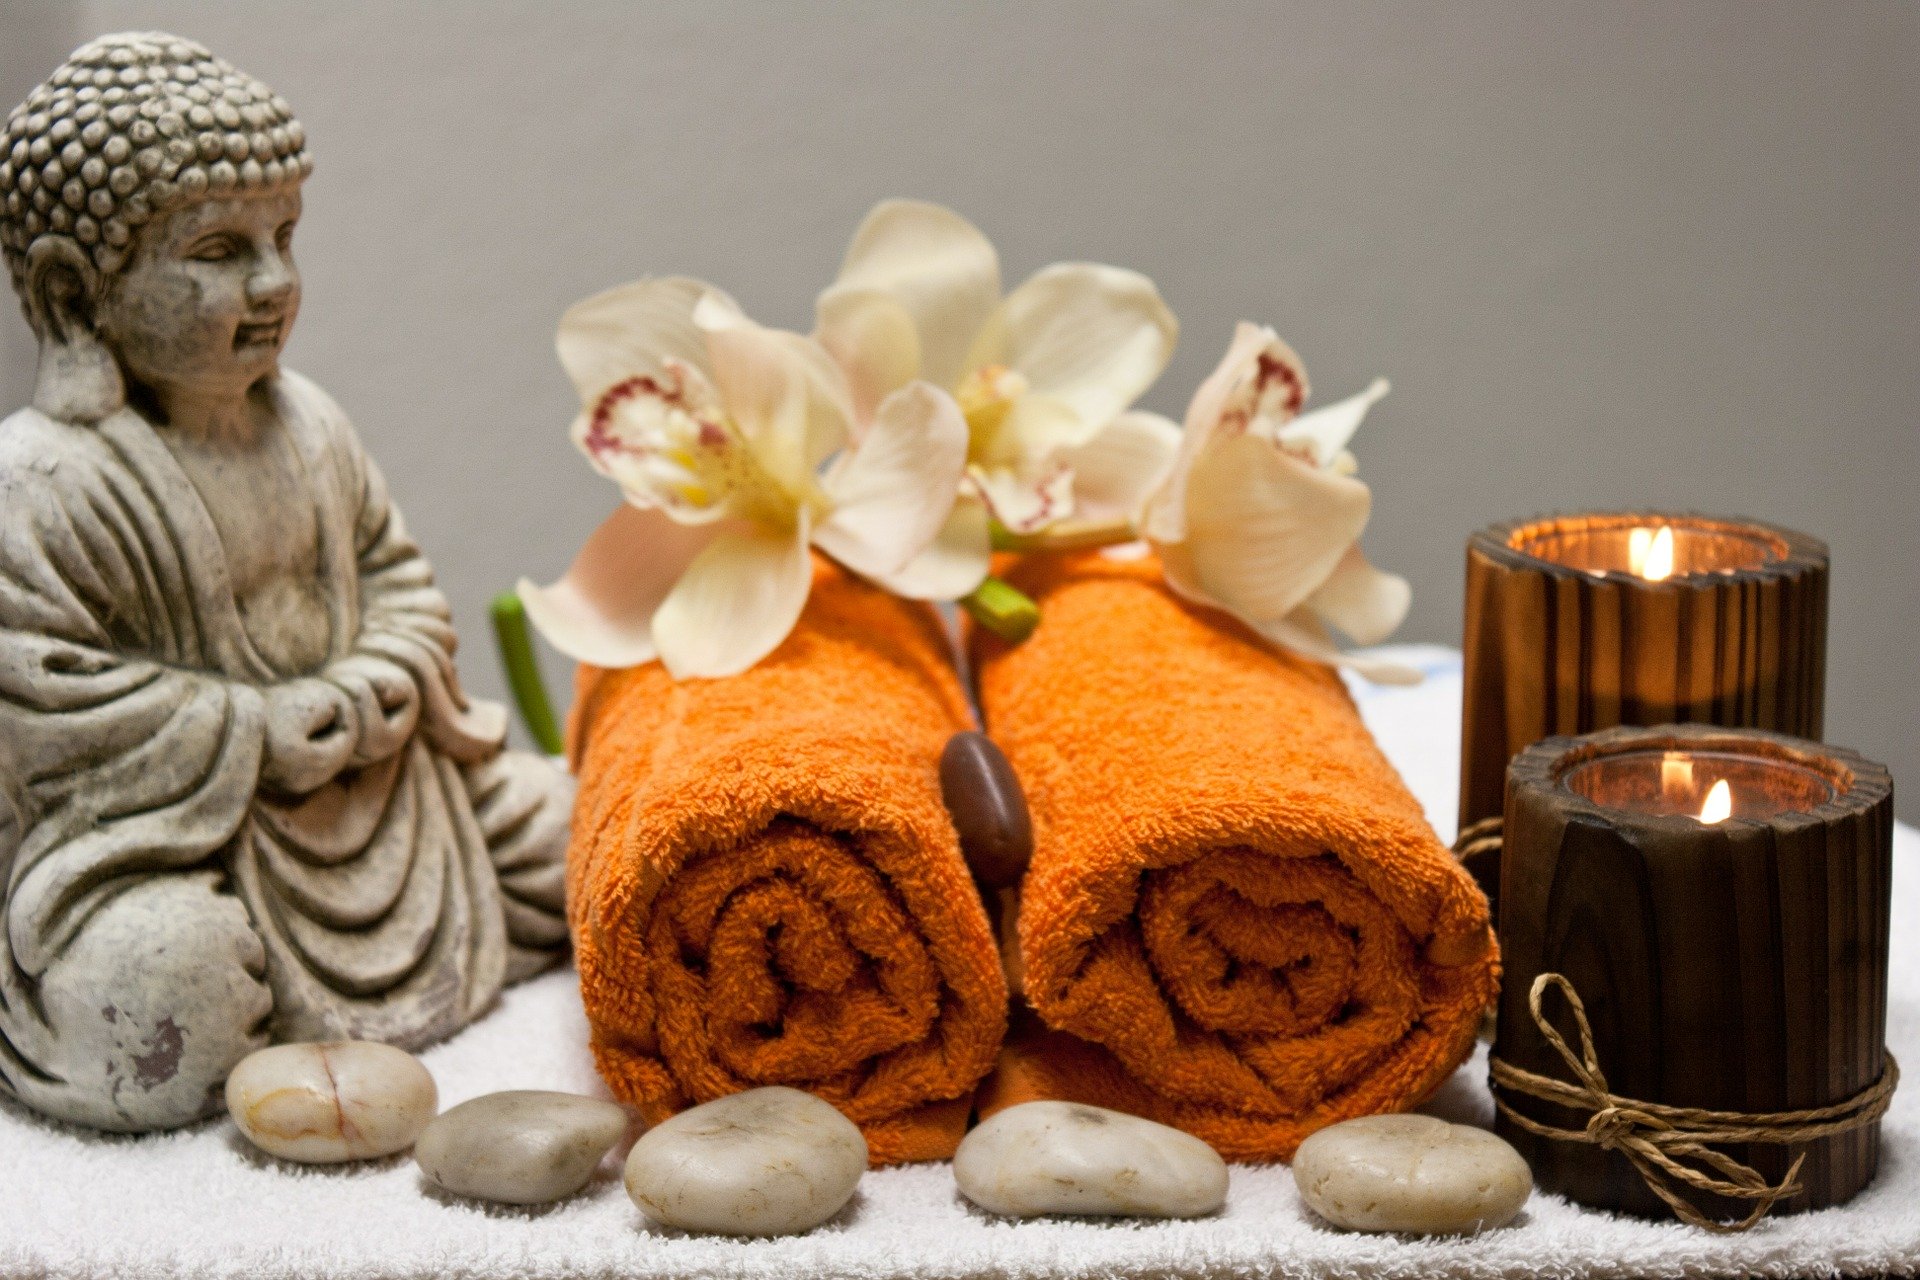 Mother's Day Jewellery Blog. A spa setting including candles, a buddha and warm towels.